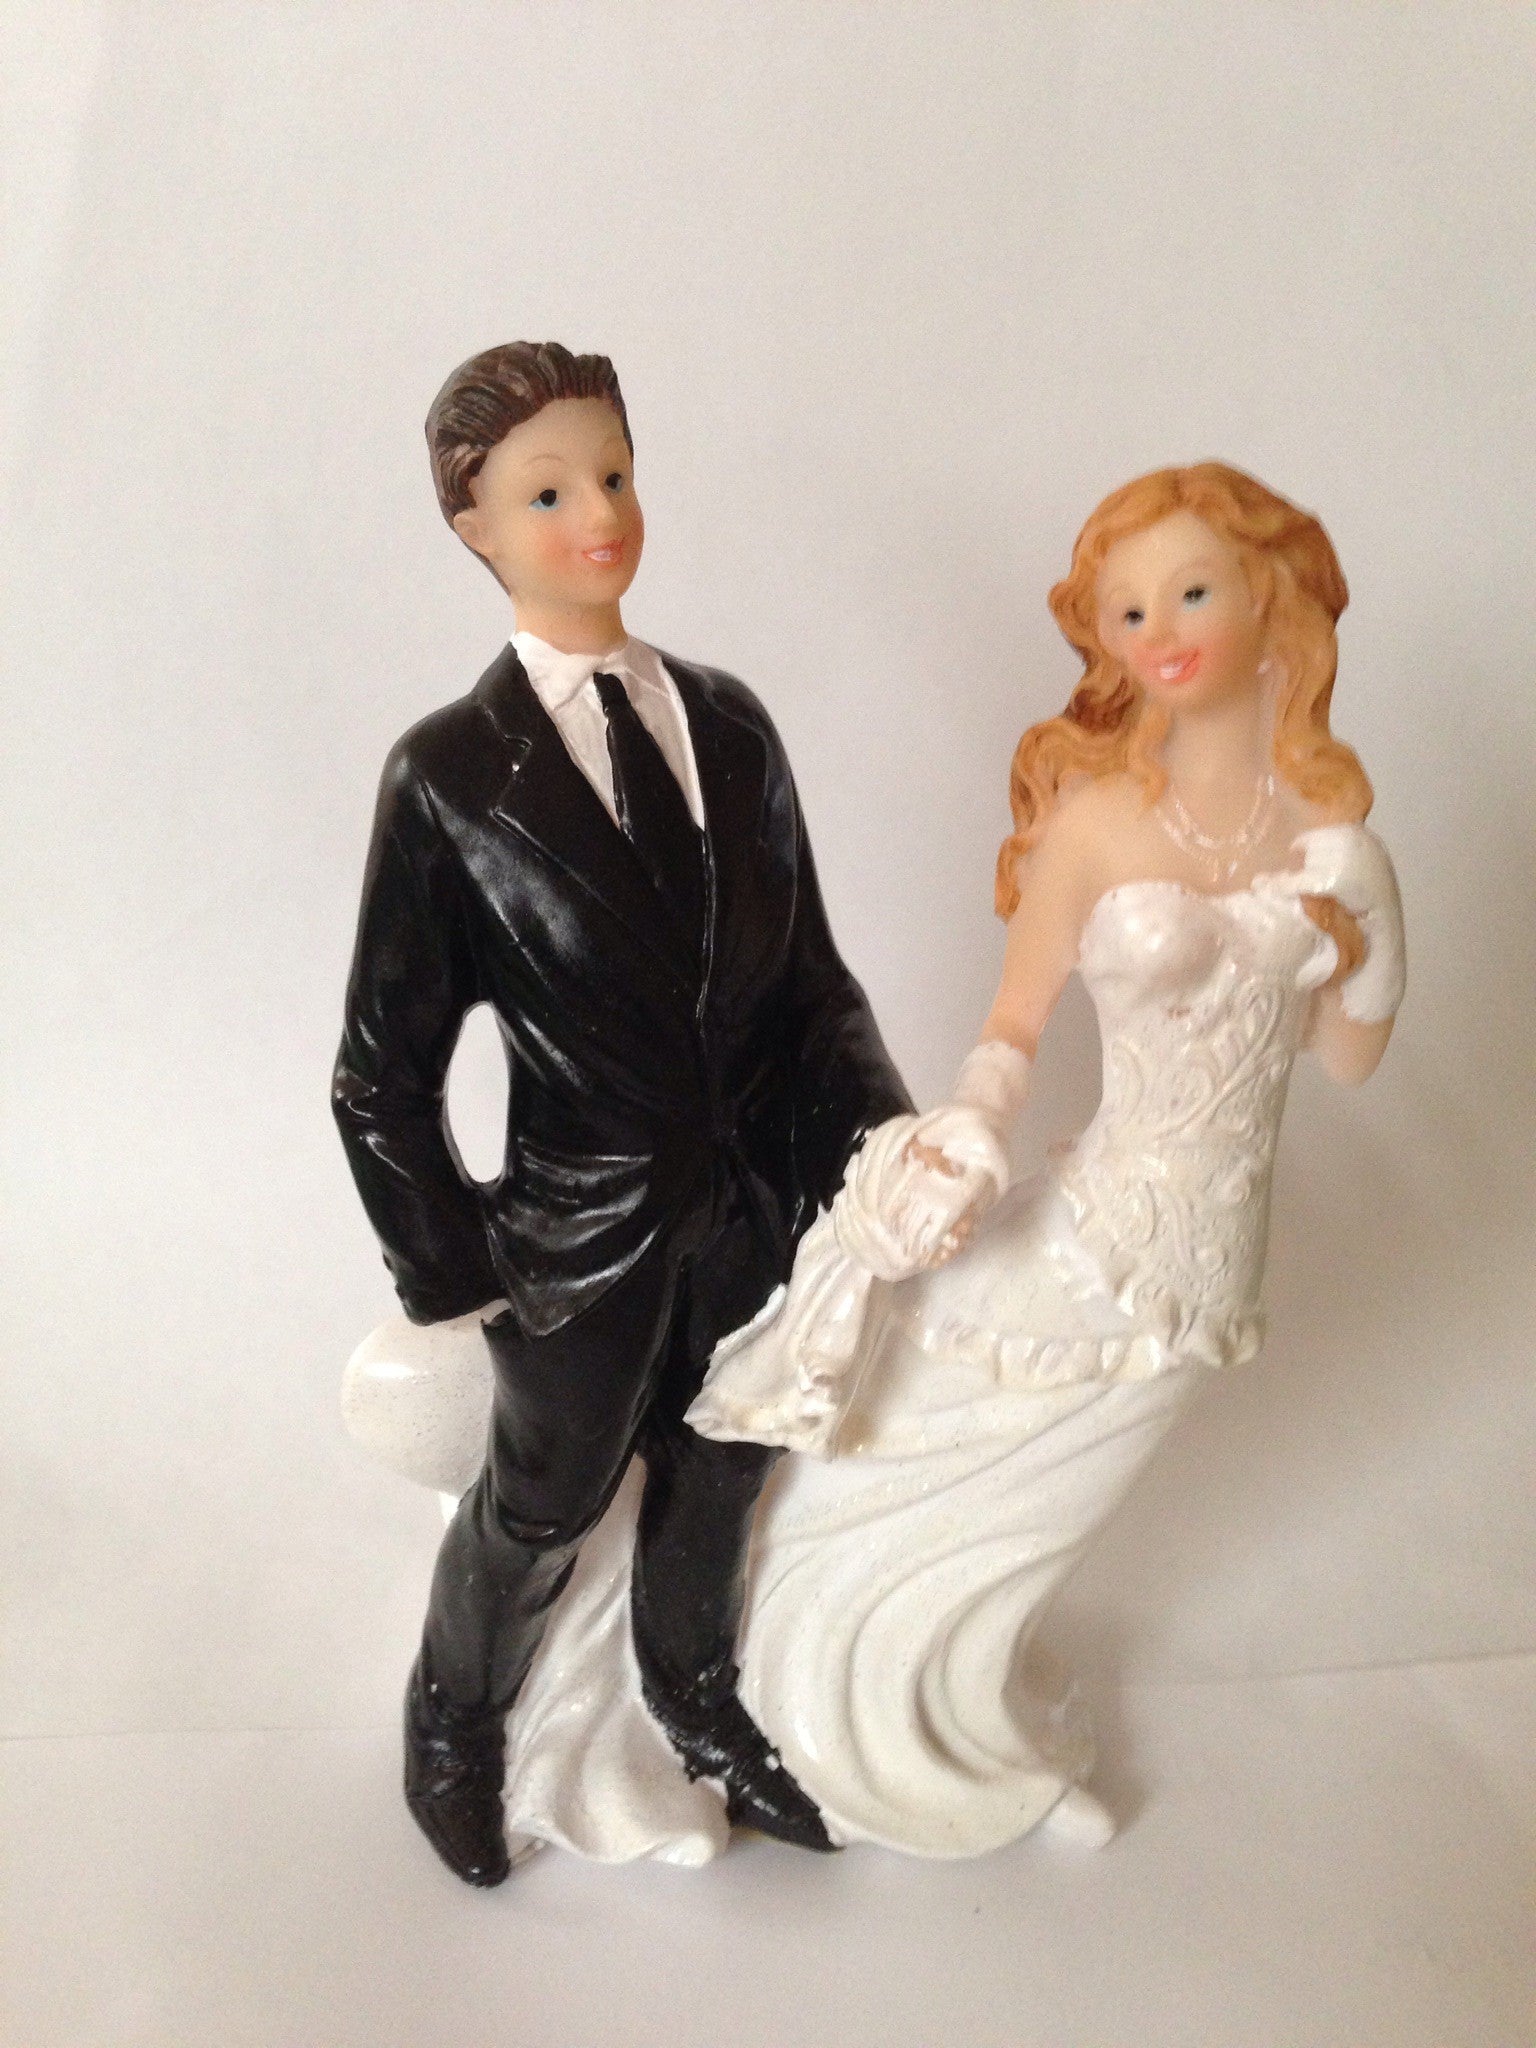 Bride and Groom Cake Topper